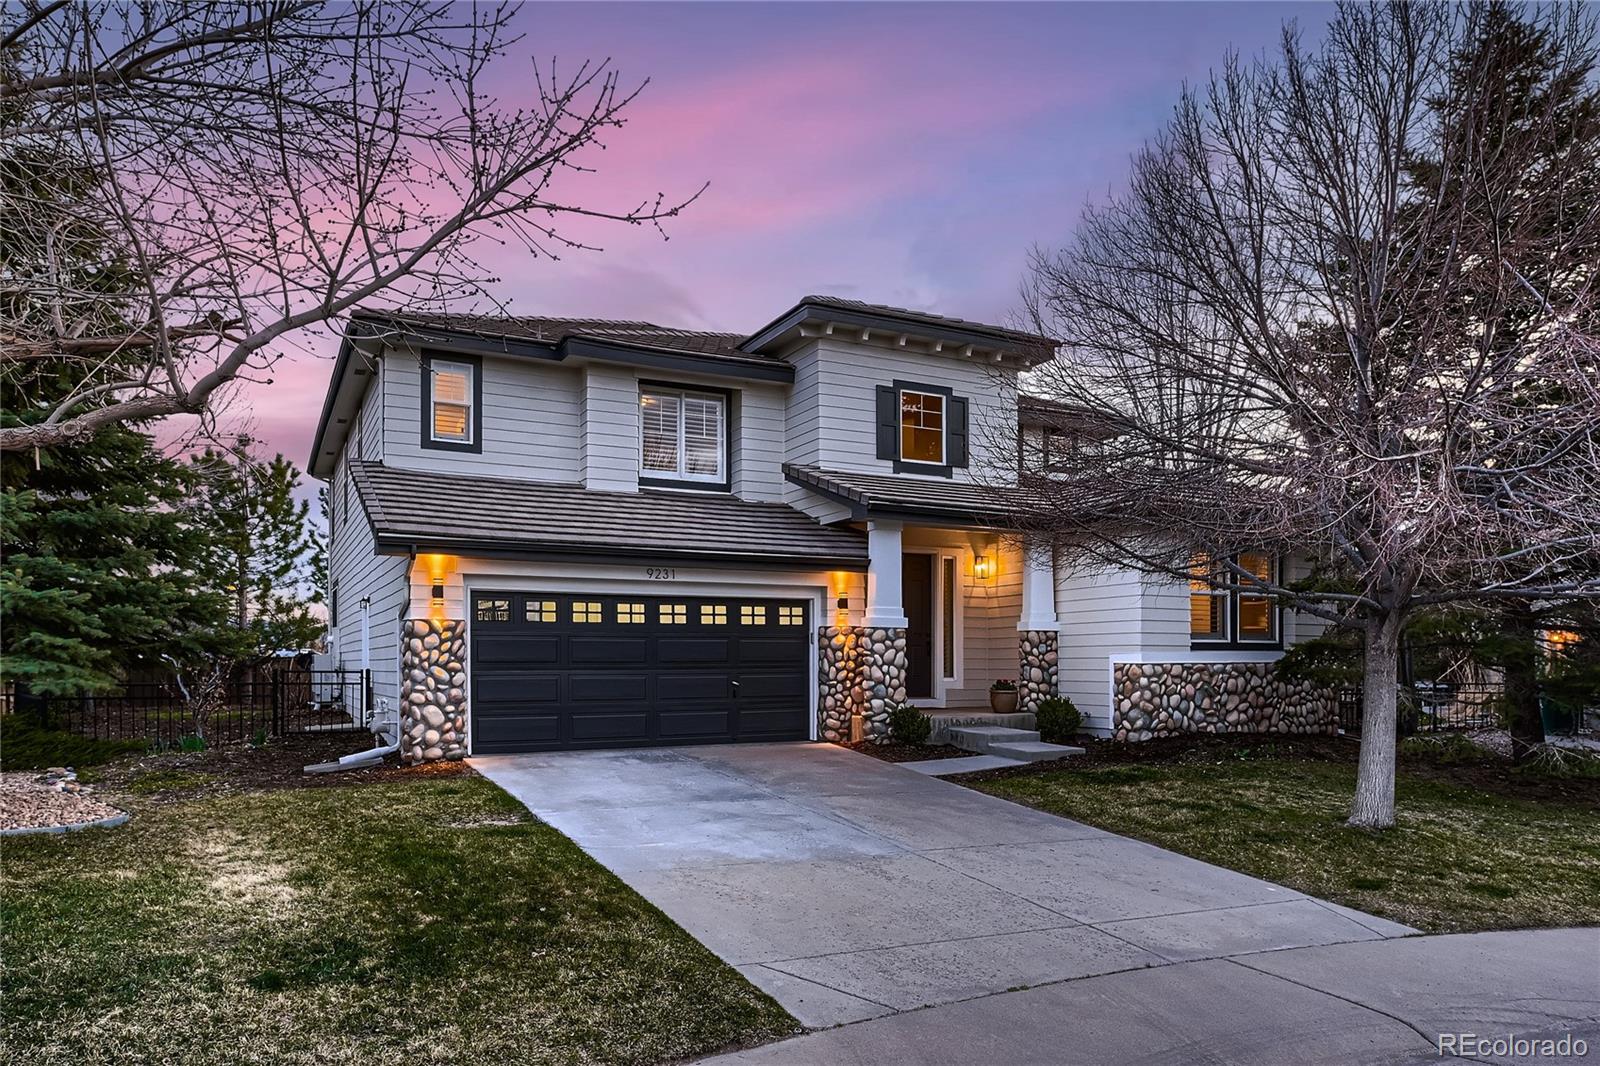 9231  aspen creek way, highlands ranch sold home. Closed on 2024-05-17 for $1,137,500.